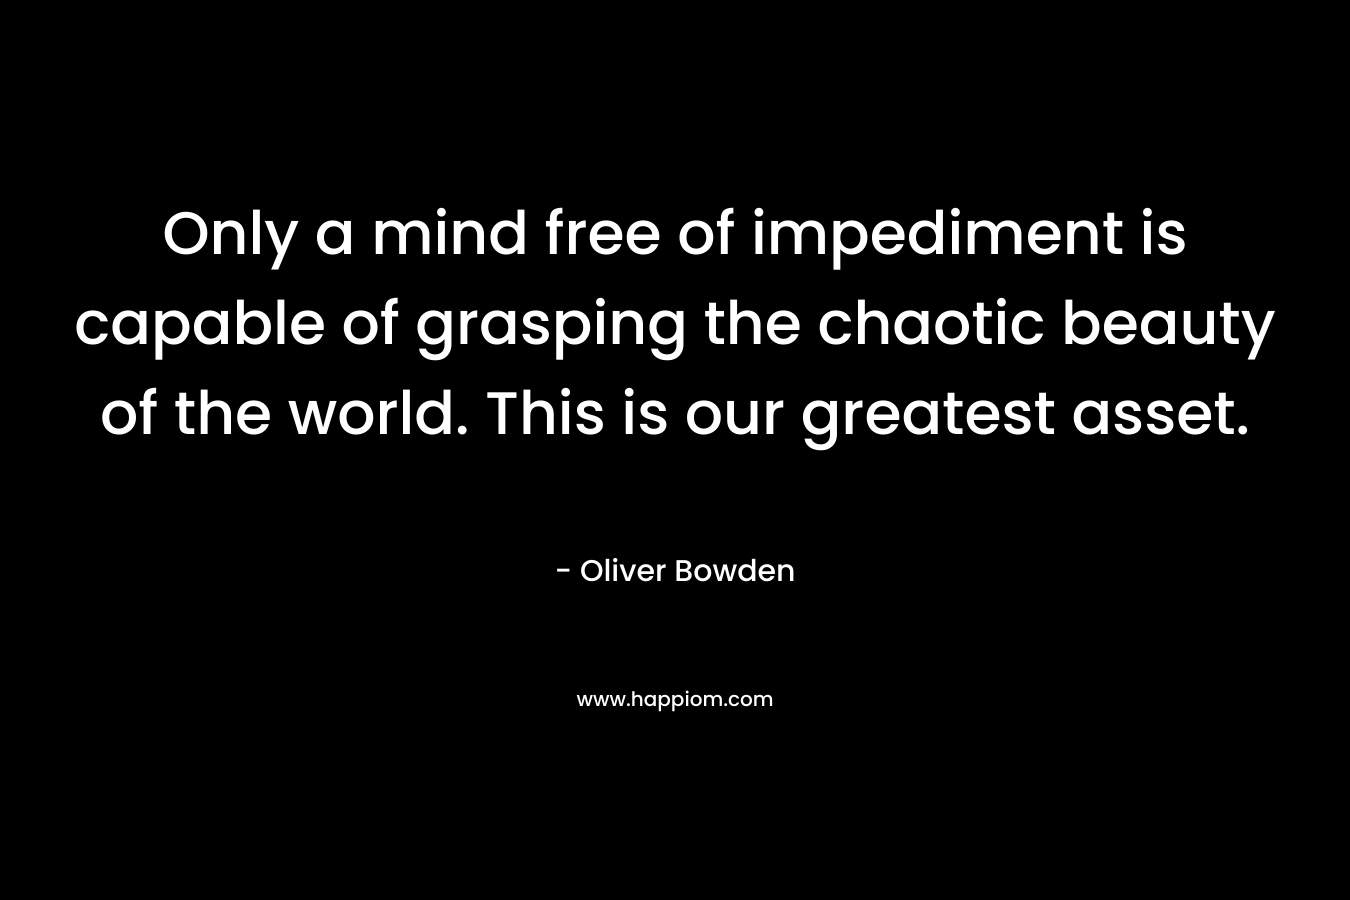 Only a mind free of impediment is capable of grasping the chaotic beauty of the world. This is our greatest asset.